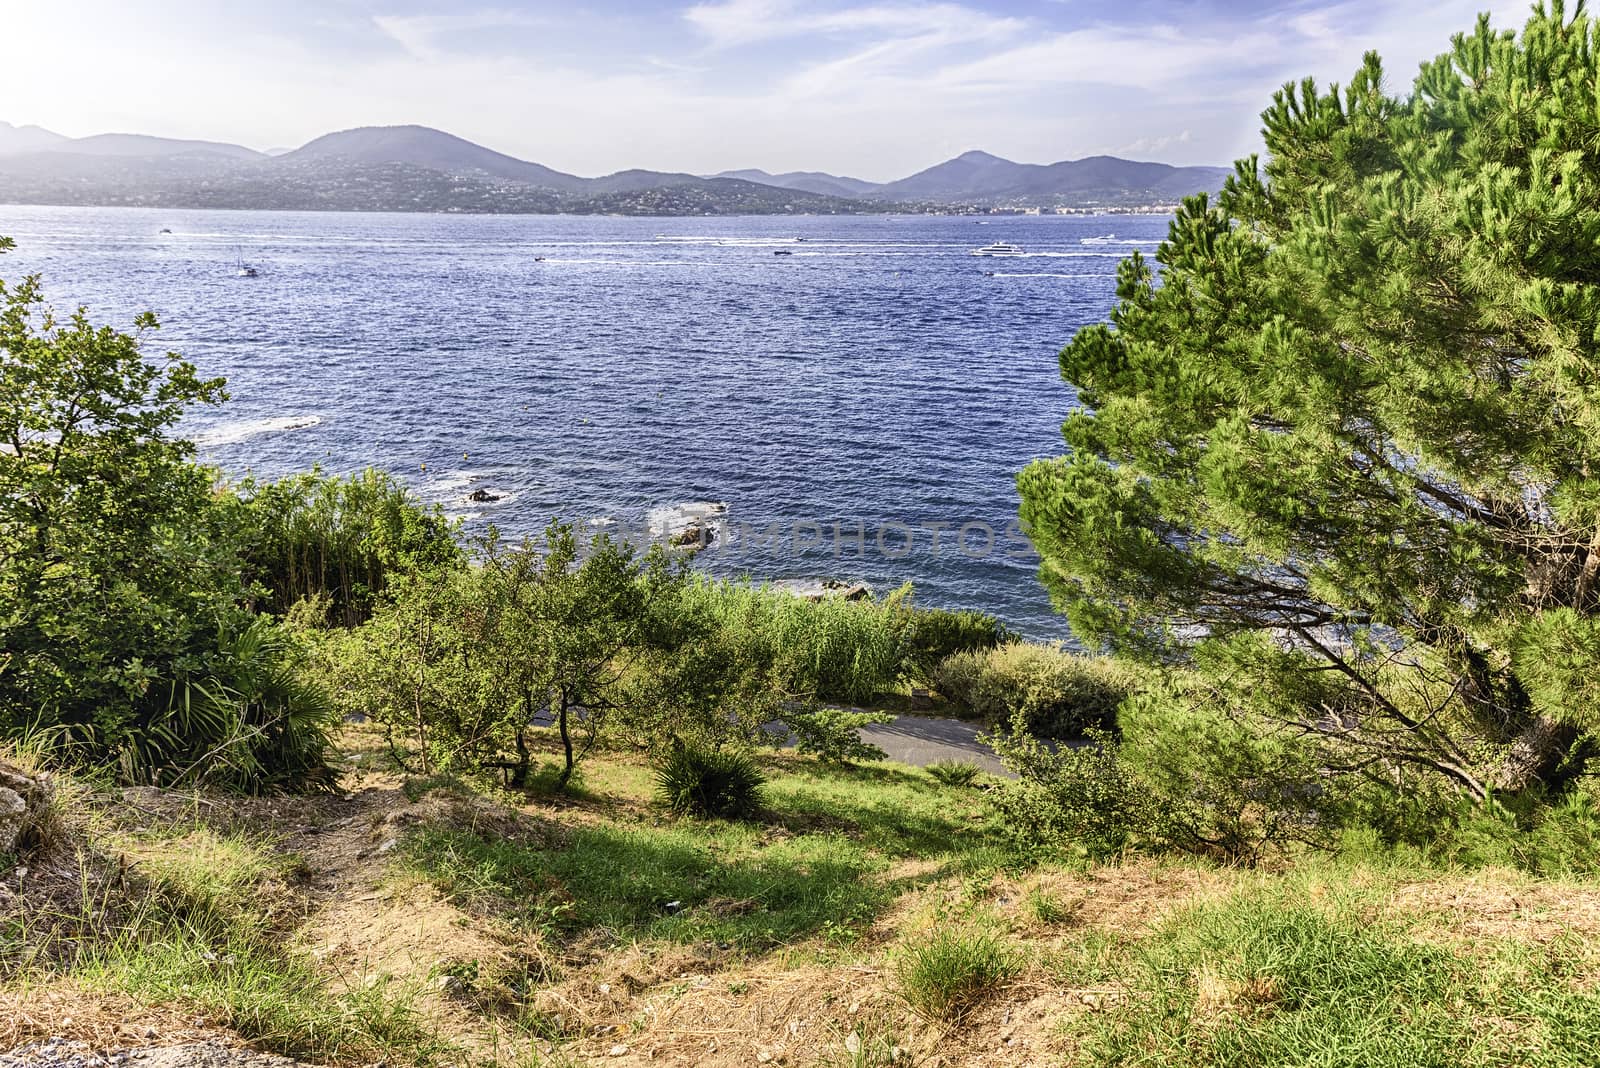 Scenic view of Saint-Tropez from Castle Hill, Cote d'Azur, Franc by marcorubino